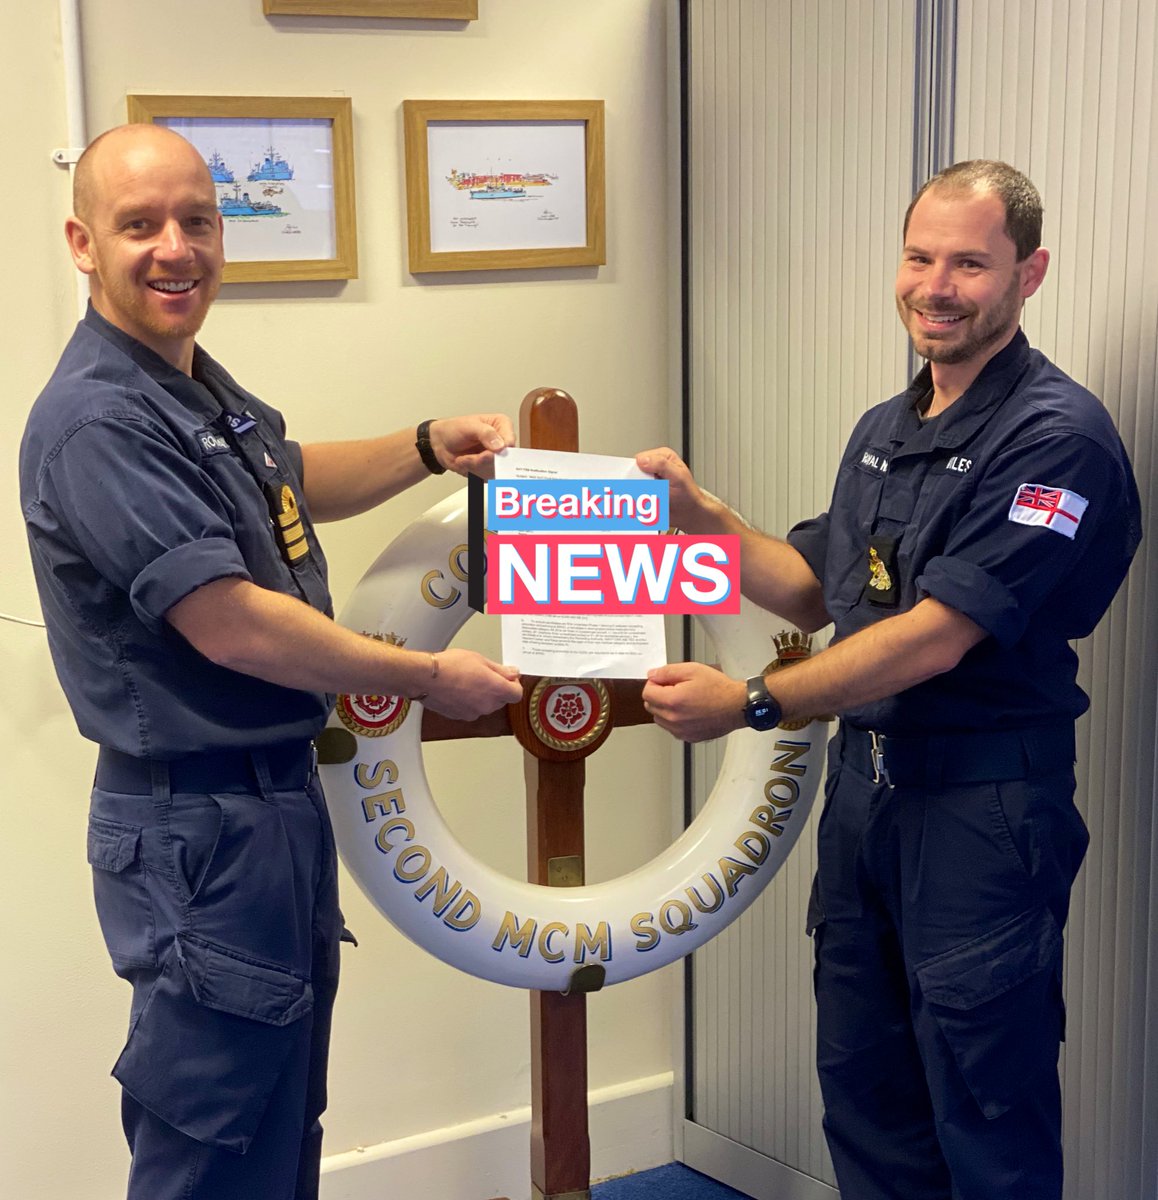 A genuine privilege to give Warrant Officer Chris (Chip) Miles the brilliant news of his selection for Commission to Officer, via the Senior Upper Yardsman scheme today. On behalf of the entire MCM community, congratulations. 
@CdrMCM @CaptainRReadwin @CaptAidyFryer @COMUKMCMFOR